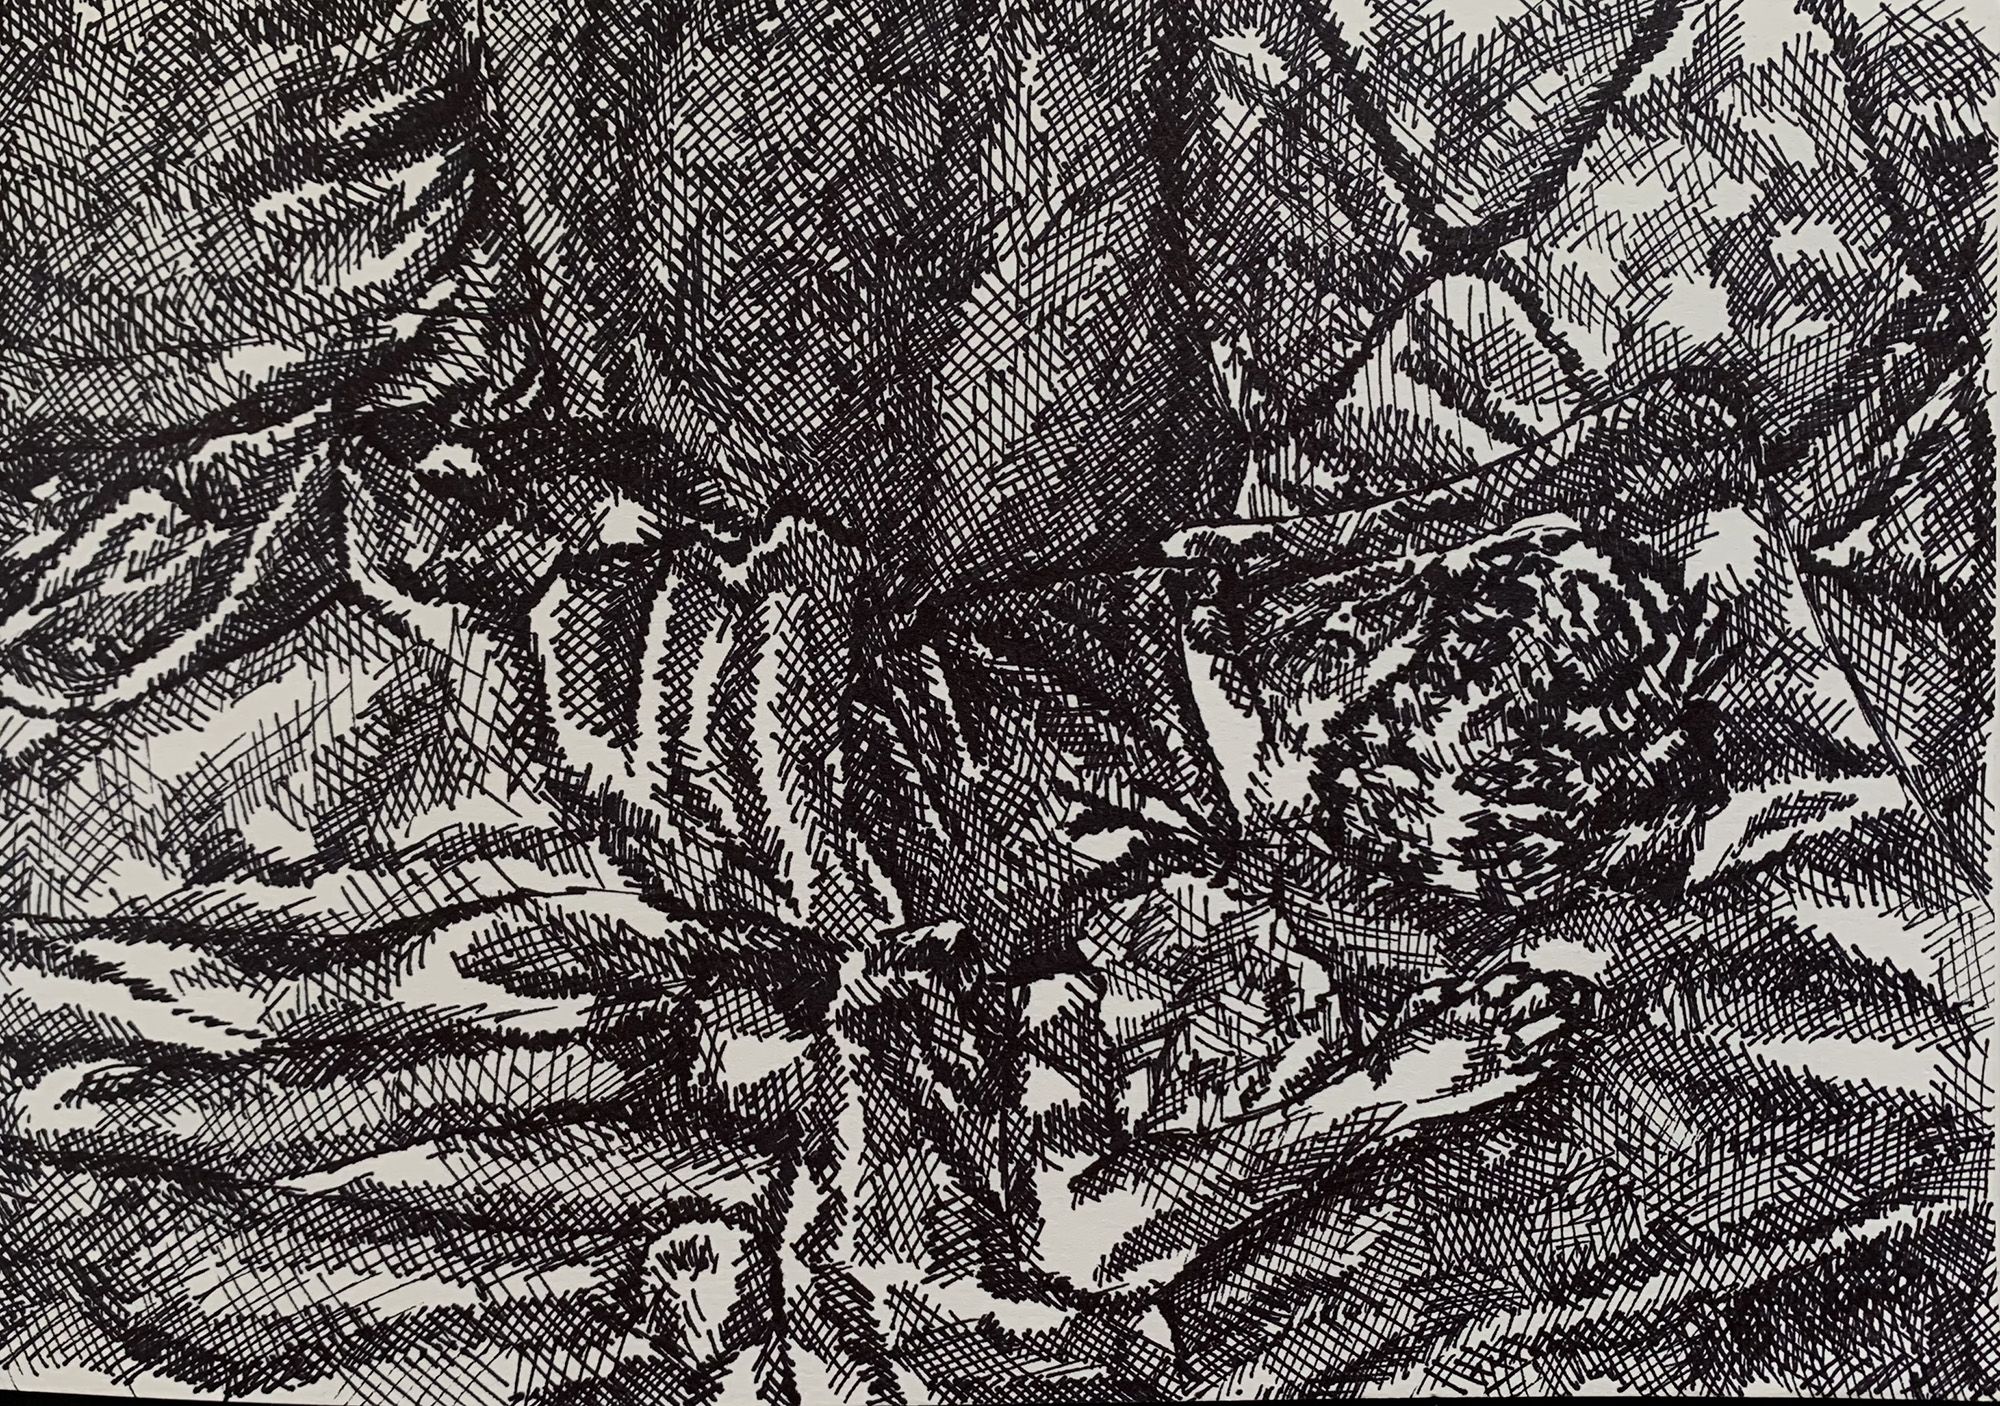 A detail of a piece constructed of intricate crosshatching